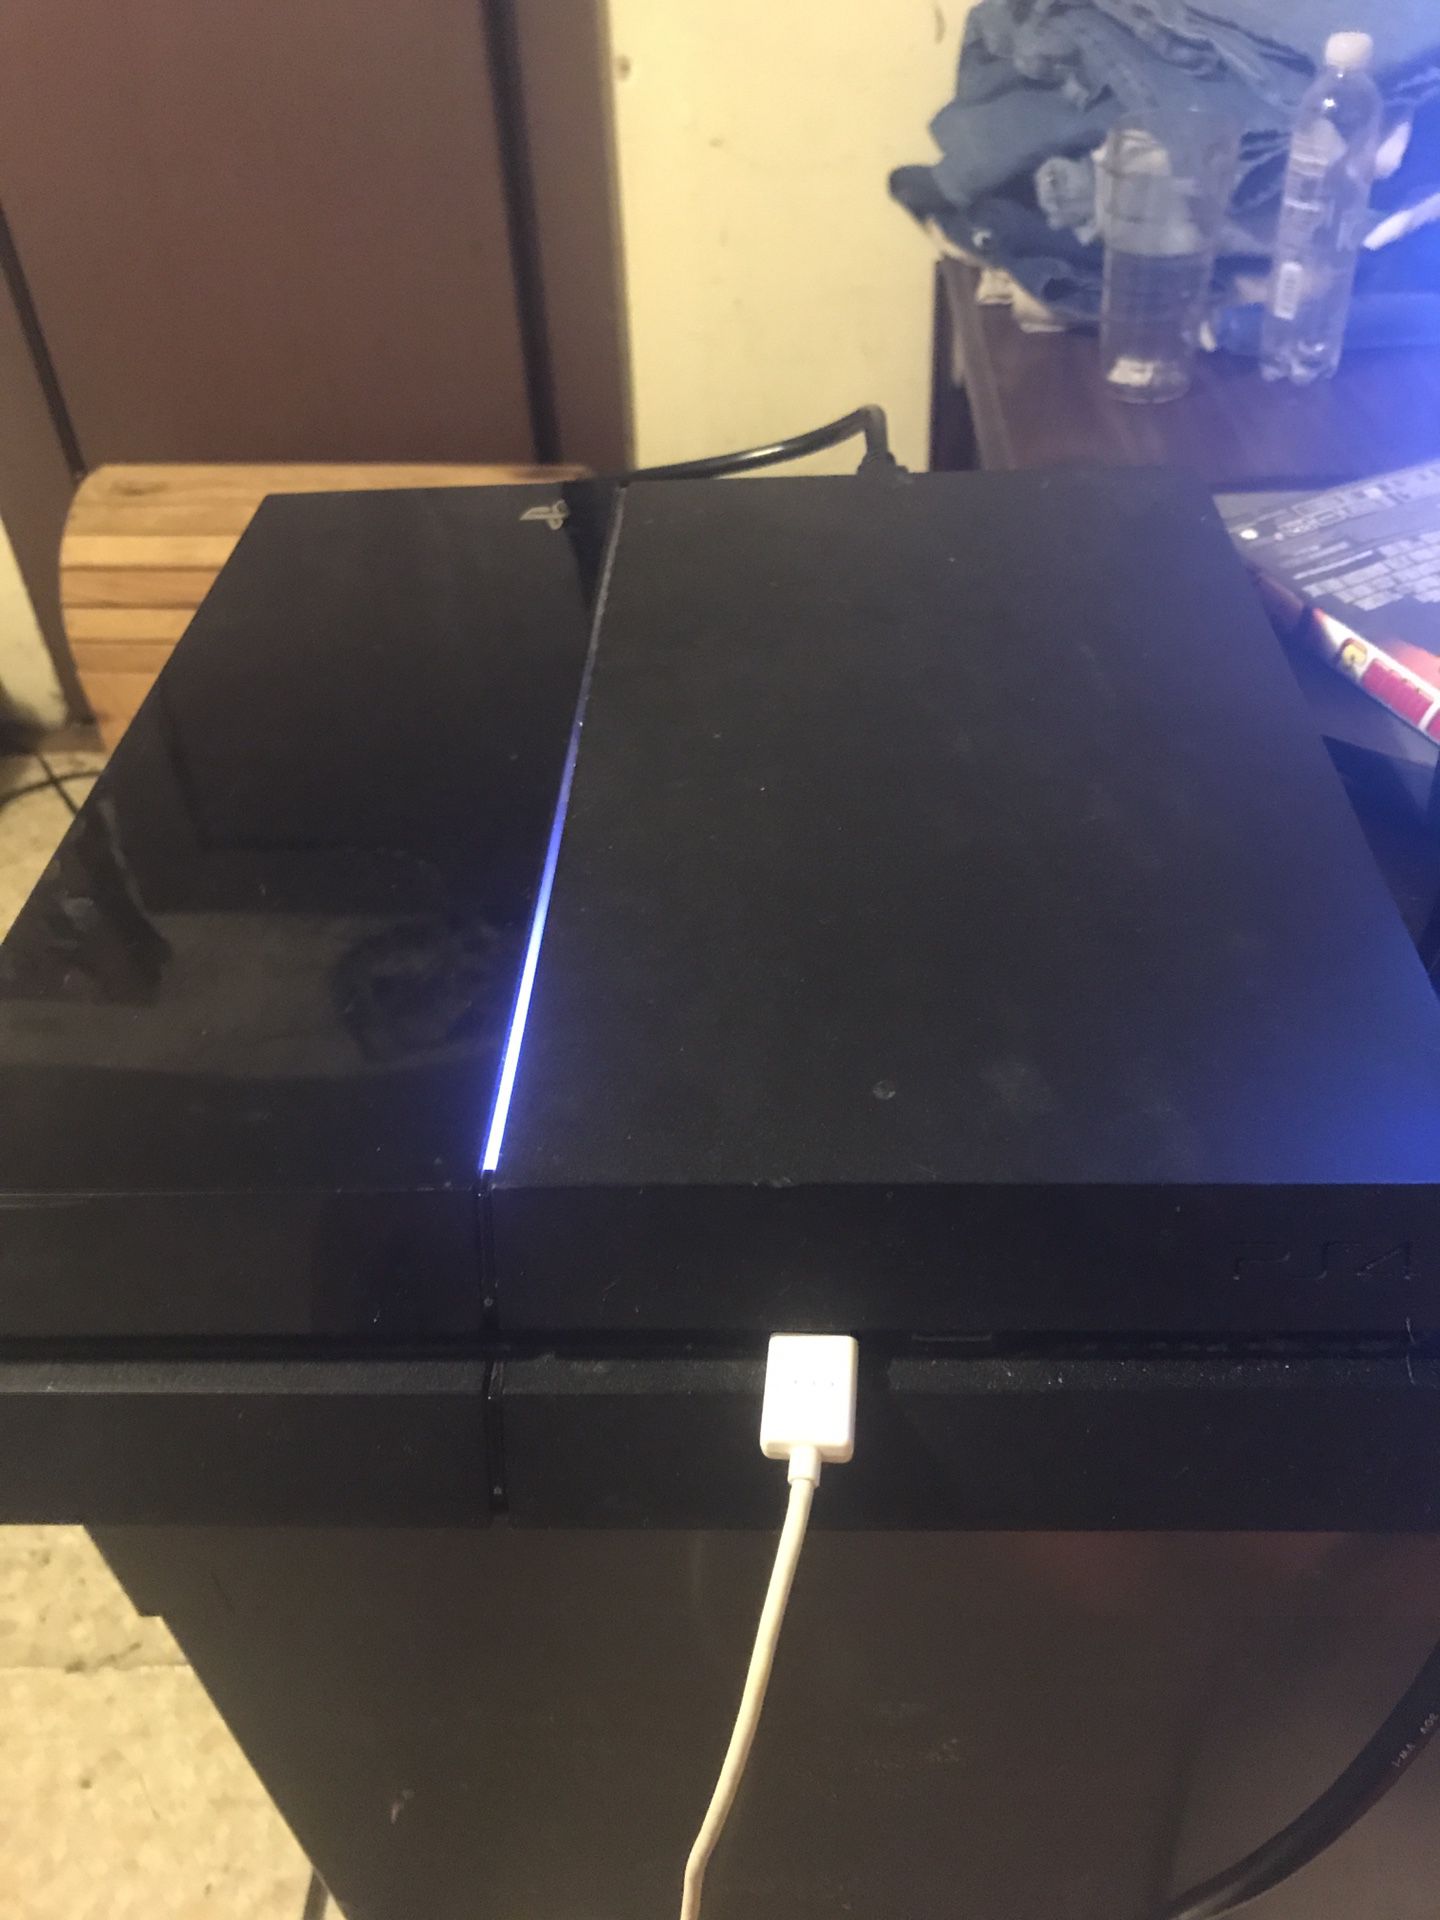 Ps4 with madden 18 and 2k16 17 18 and 19 and more games with a controller and all of power cable cords